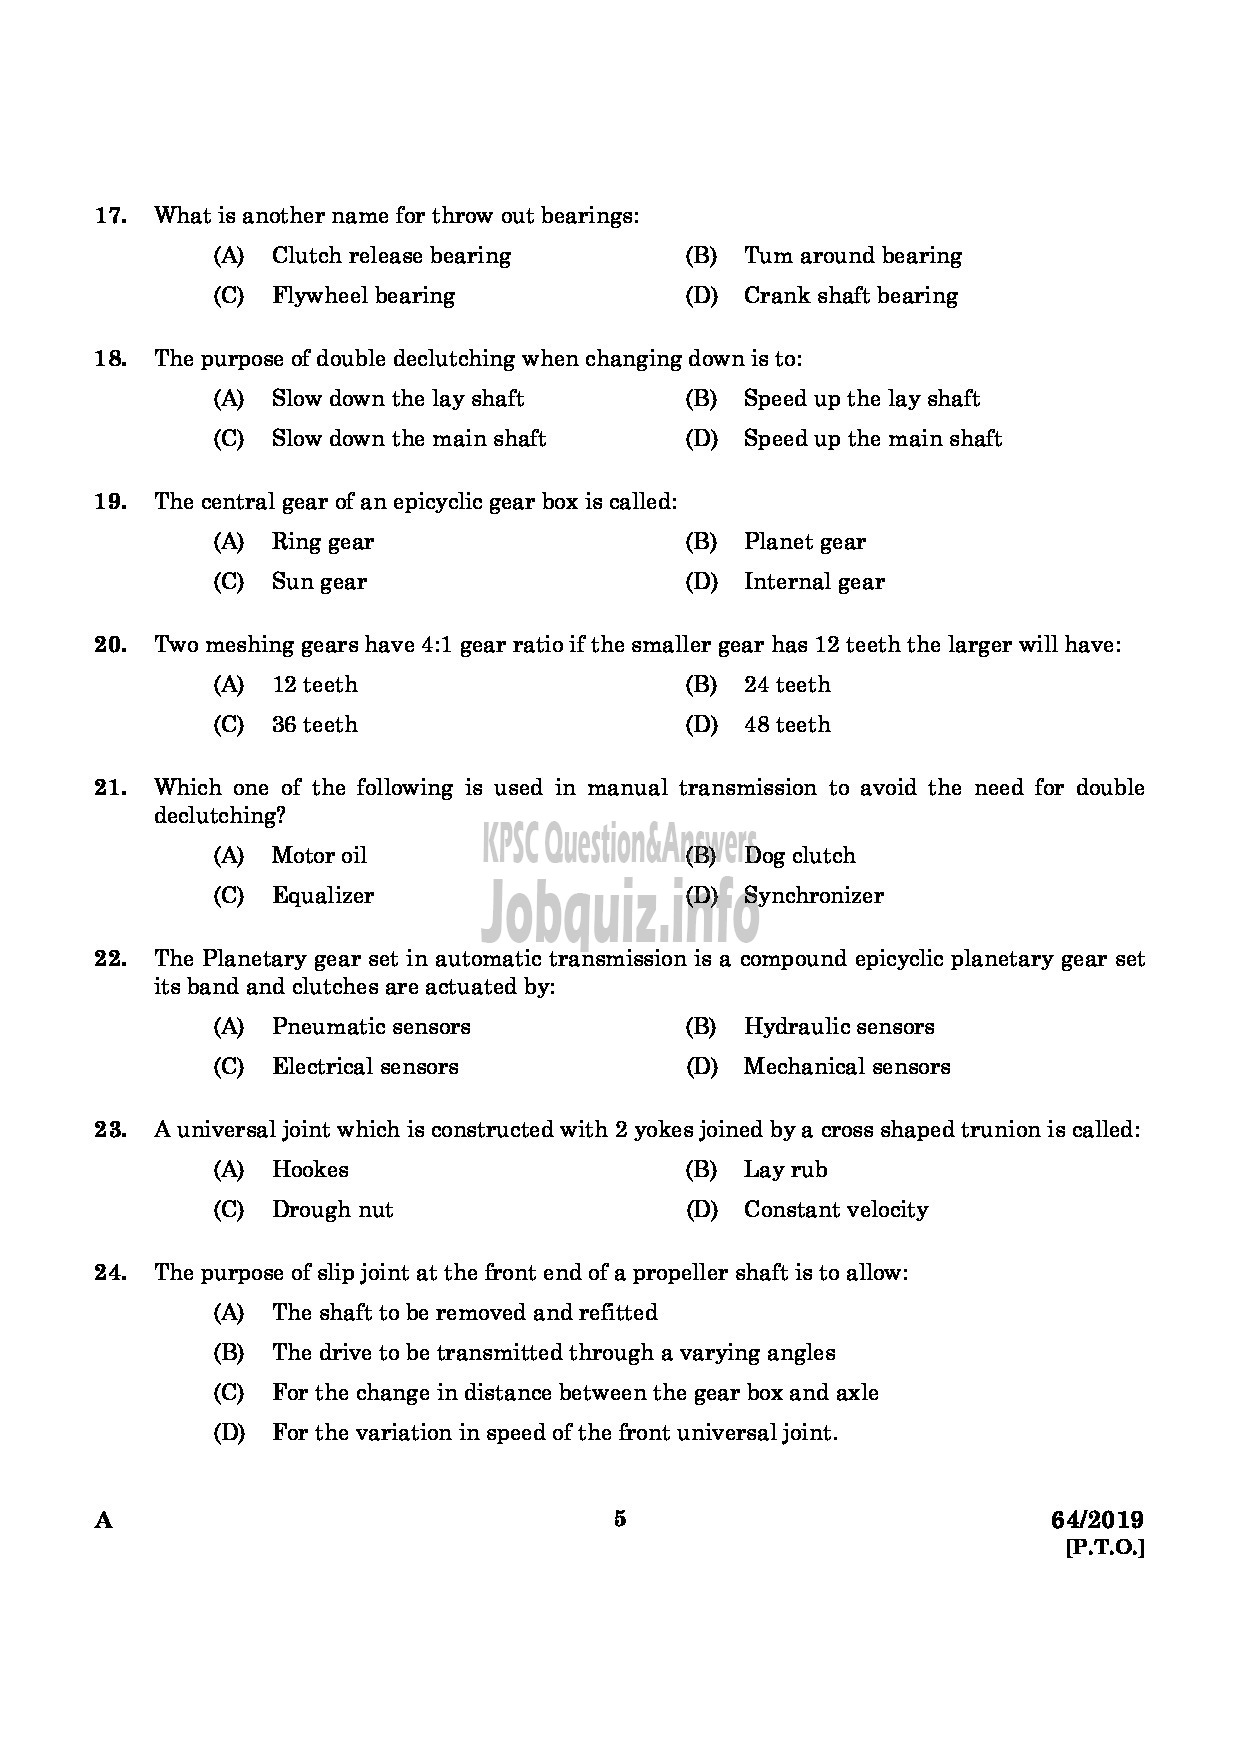 Kerala PSC Question Paper - DRILLING ASSISTANT GROUND WATER DEPARTMENT English -3